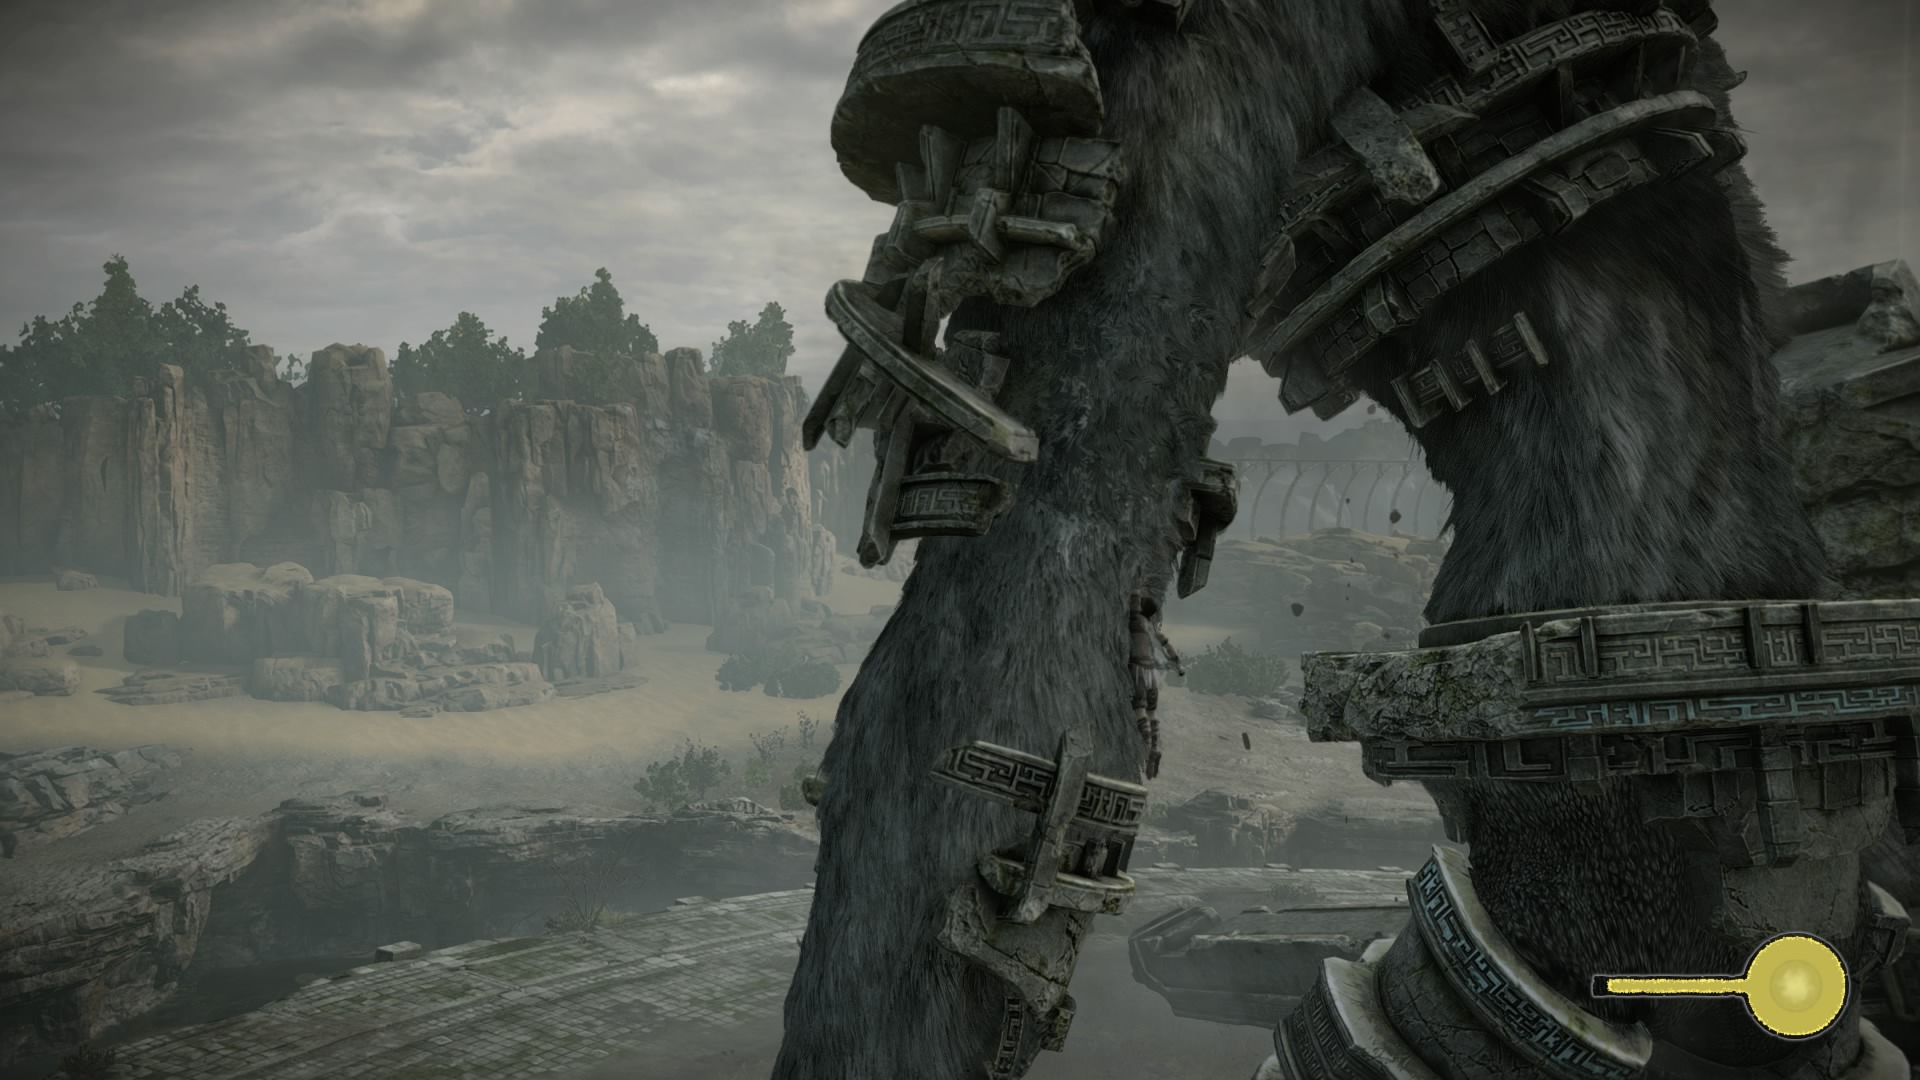 Shadow of the Colossus PS4 Gameplay Walkthrough Part 1 - 1st & 2nd